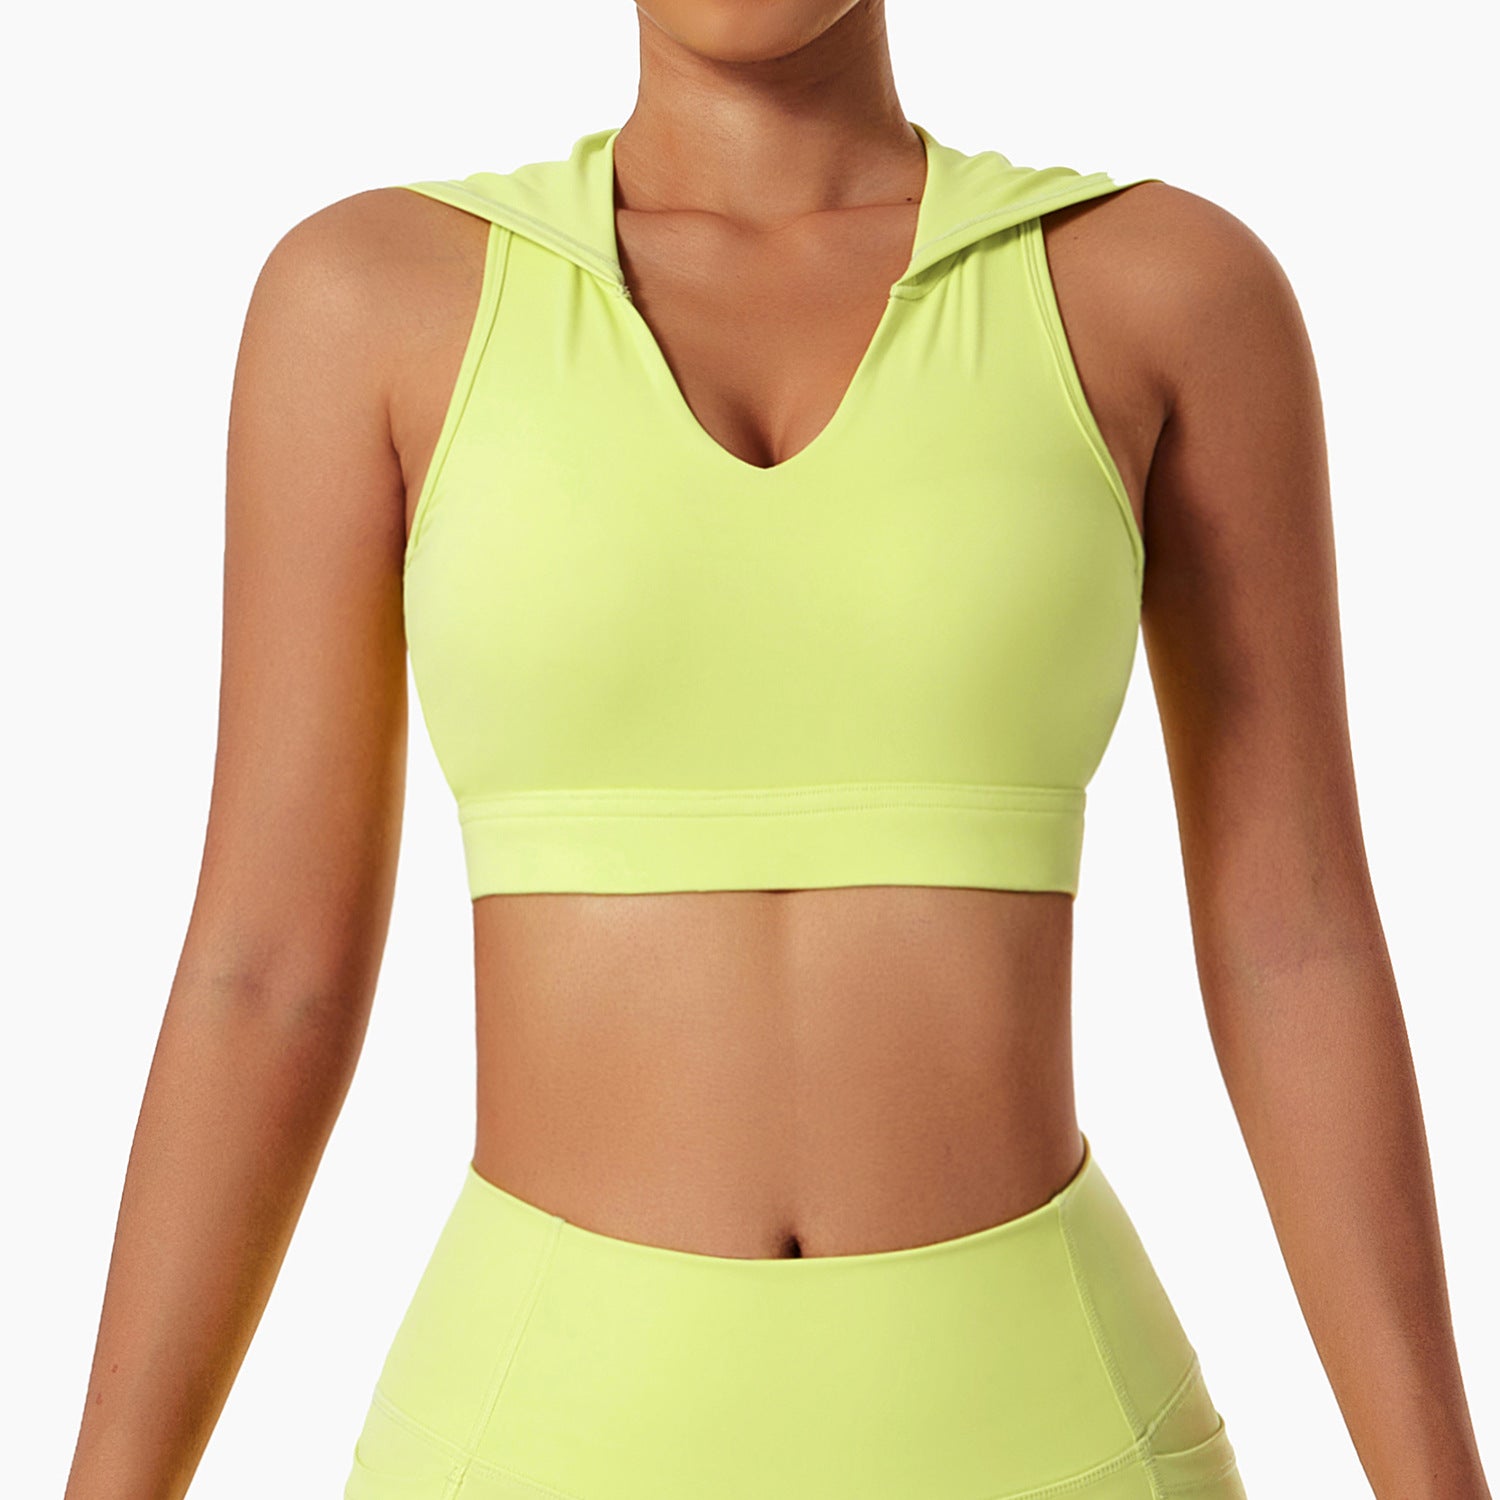 shock-prove workout bra with hooded